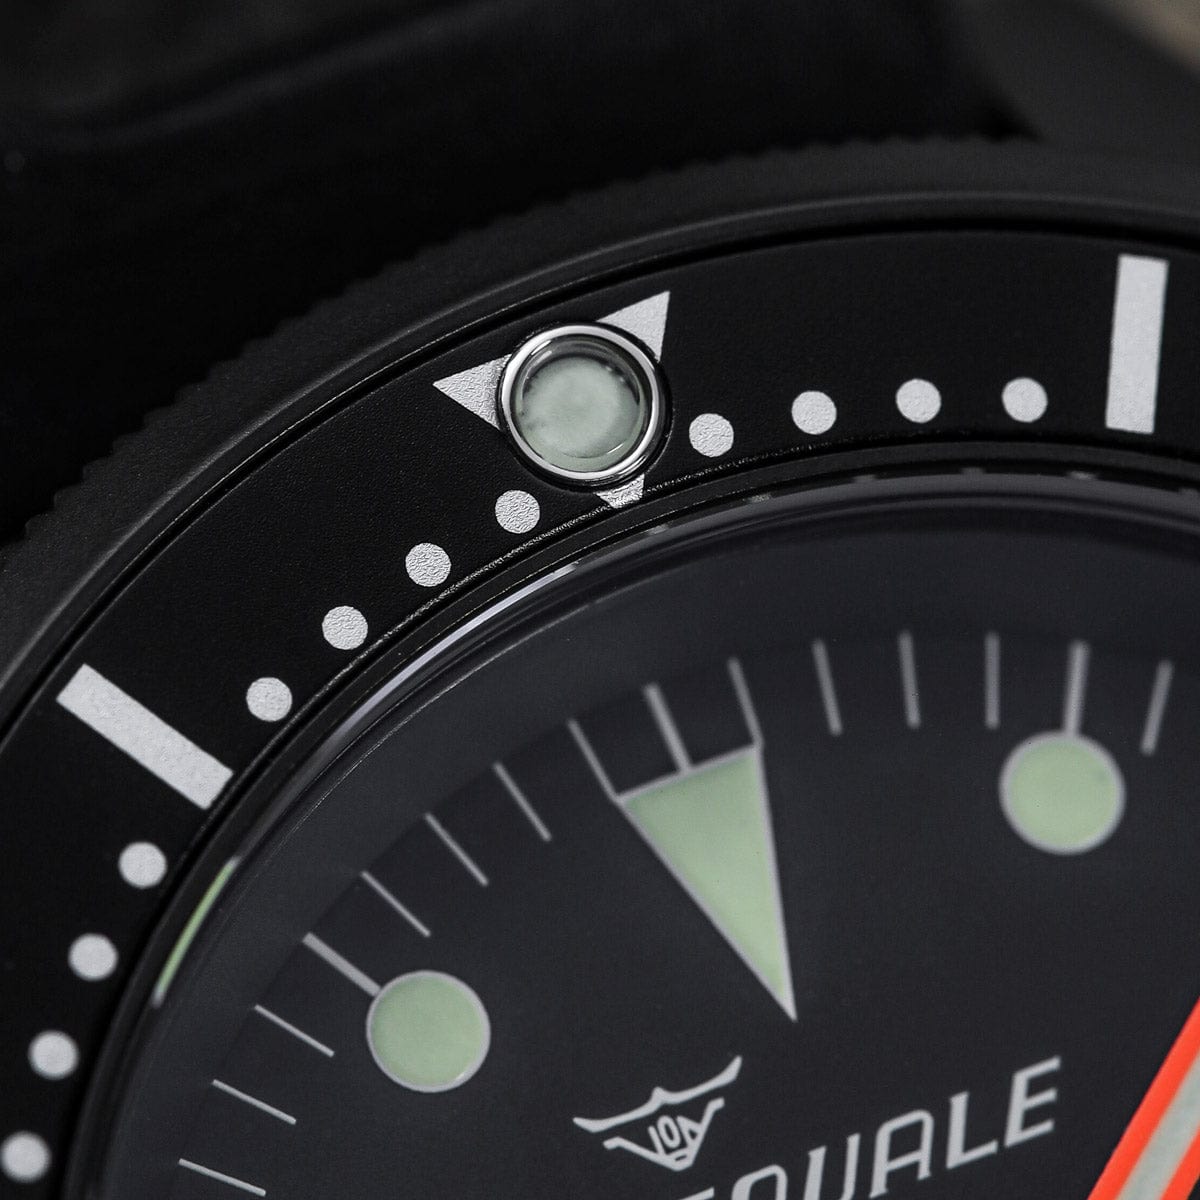 Squale 1521 Black PVD Swiss Made Diver's Watch